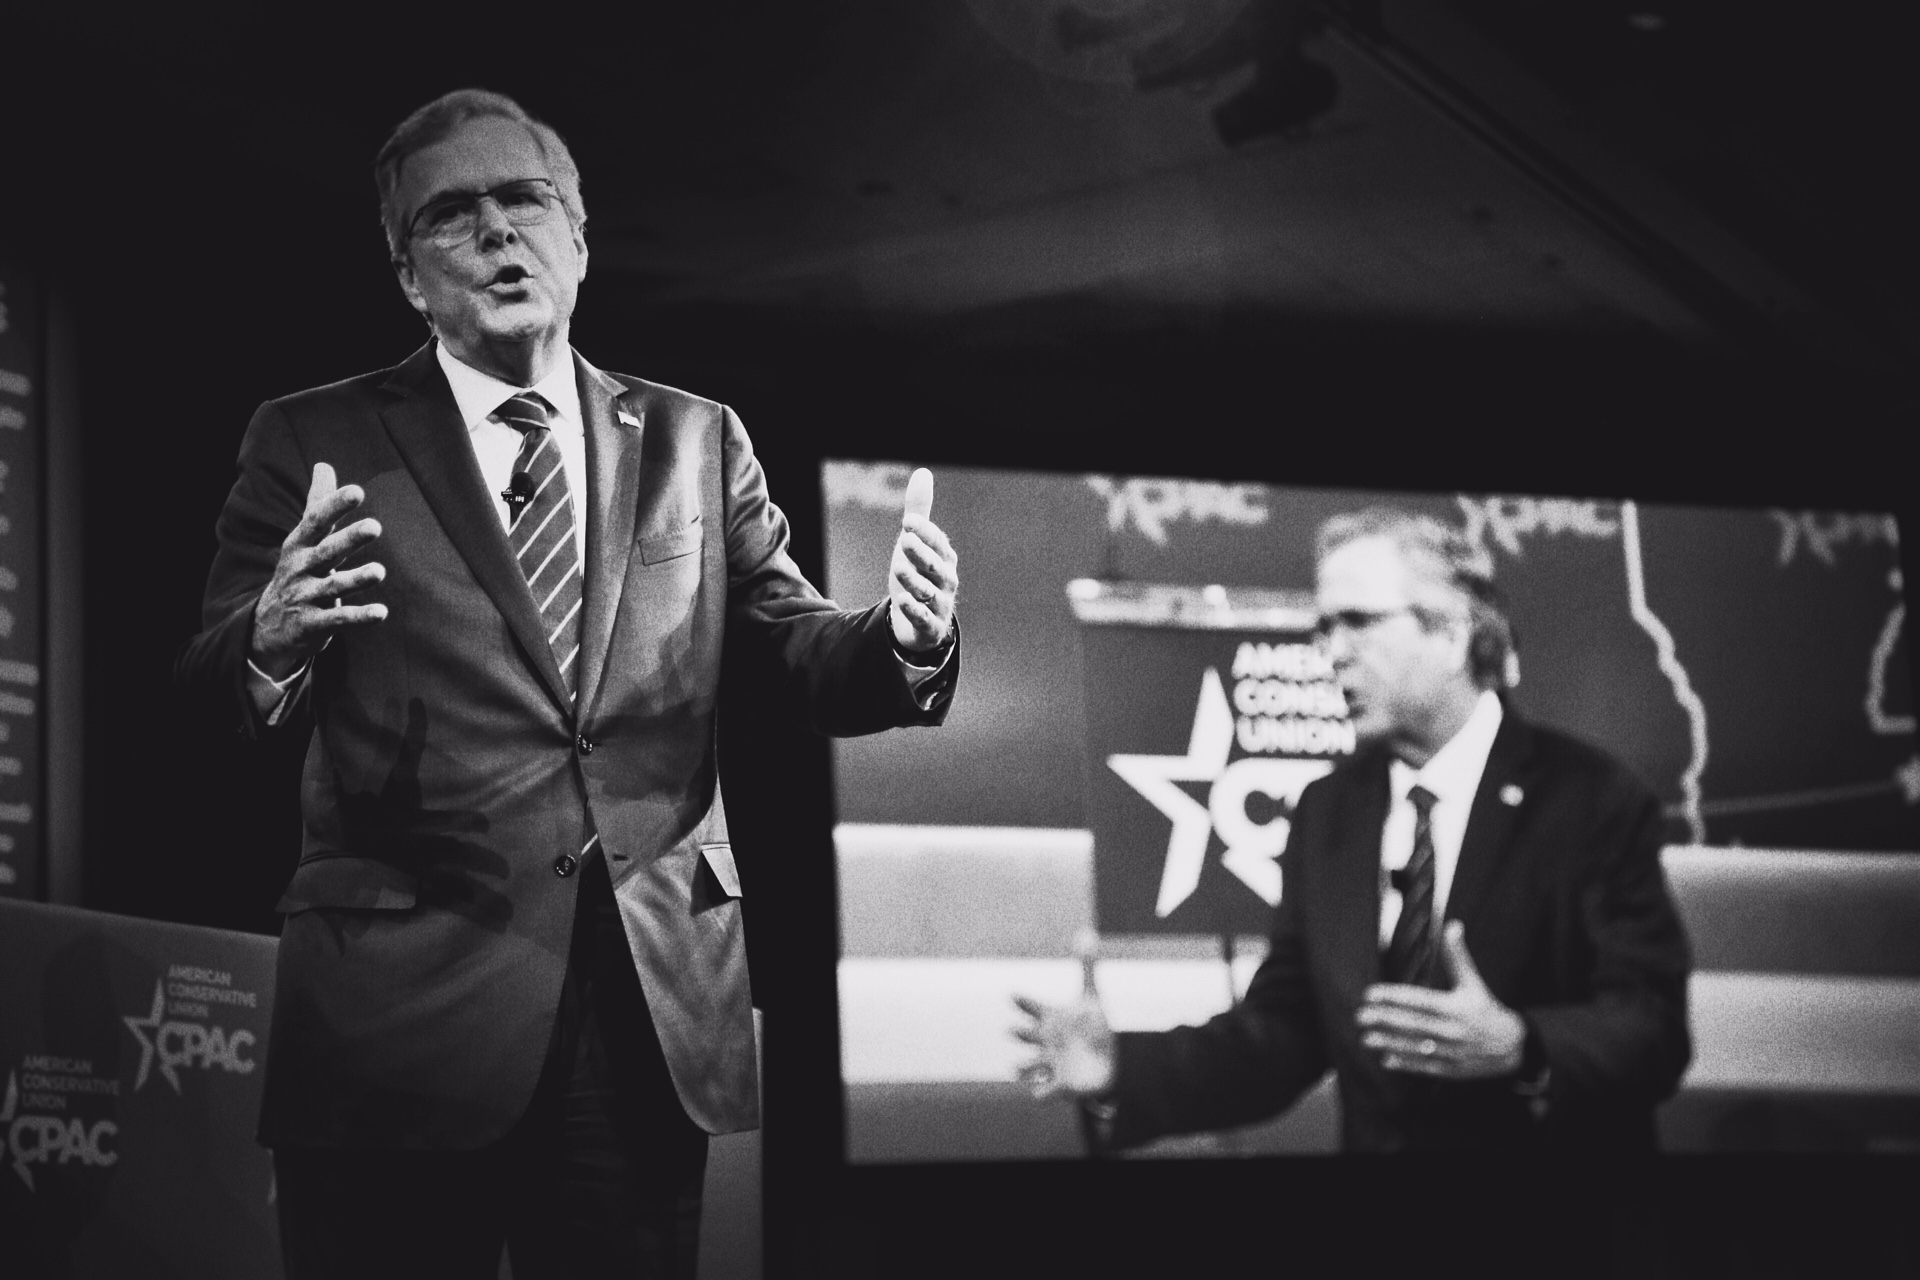 Jeb Bush speaks at CPAC in National Harbor, Md. on Feb. 27, 2015.